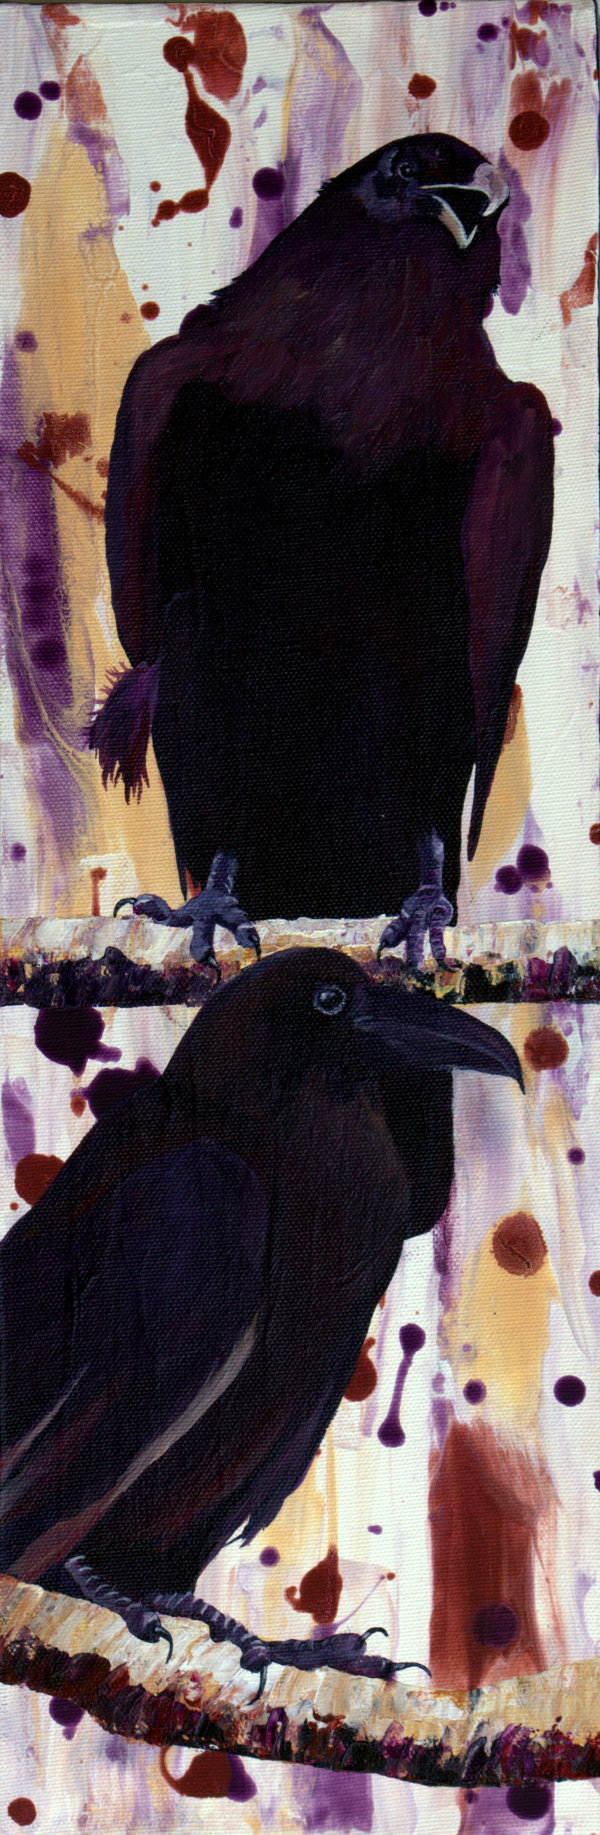 Two Ravens by Lorelle Carr